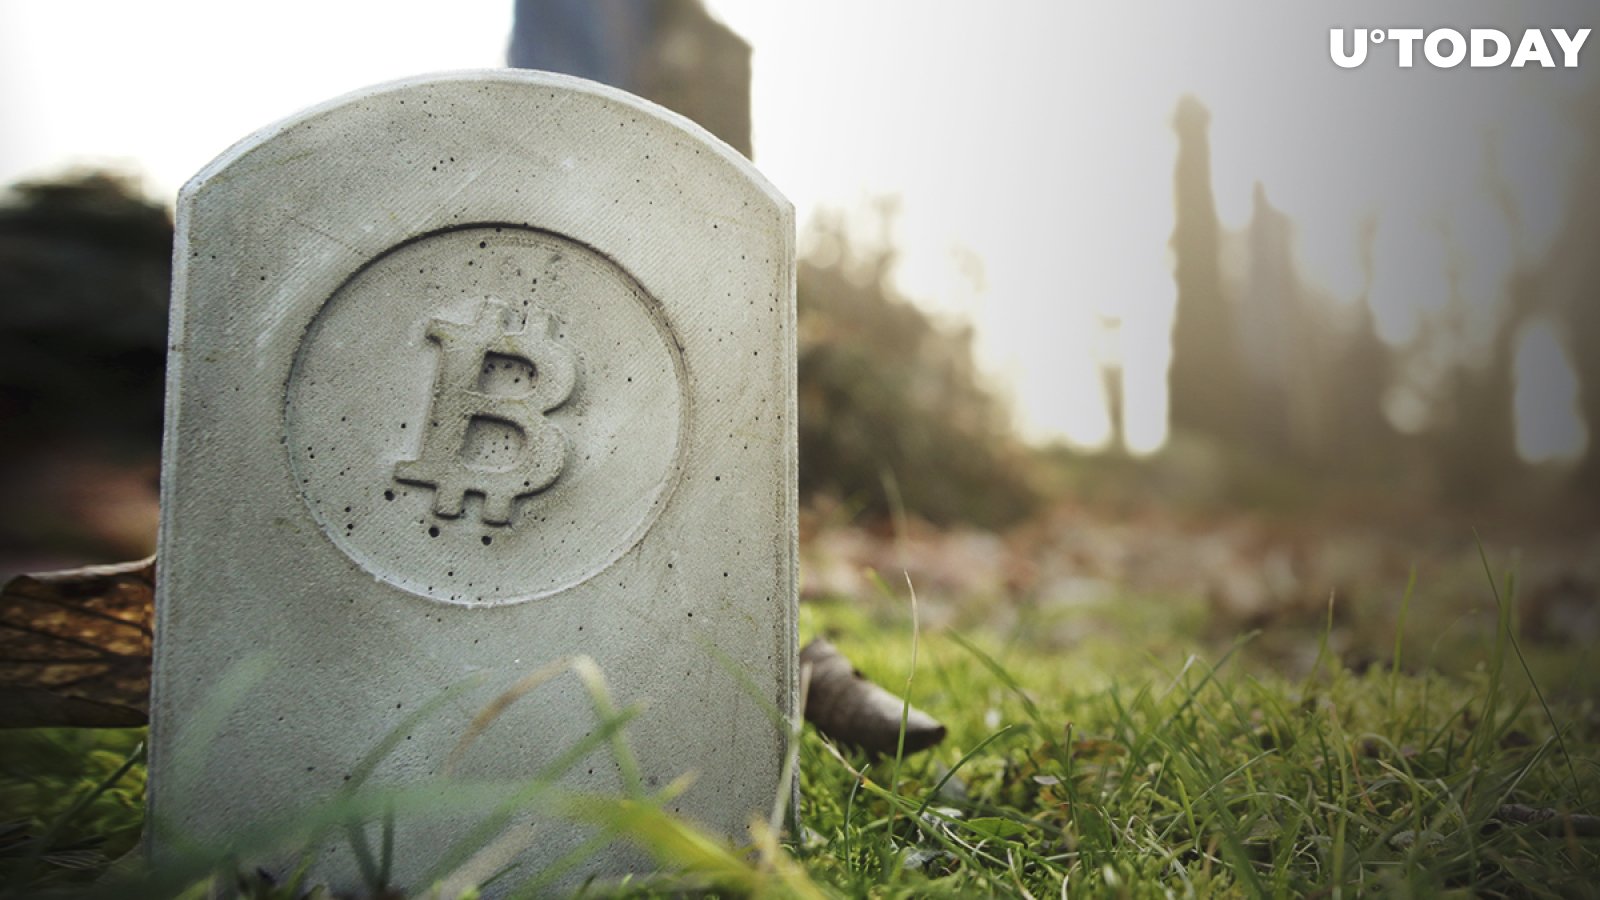 Bitcoin Is Dying, According to Top Trader Who Masterfully Shorted BTC at $20,000